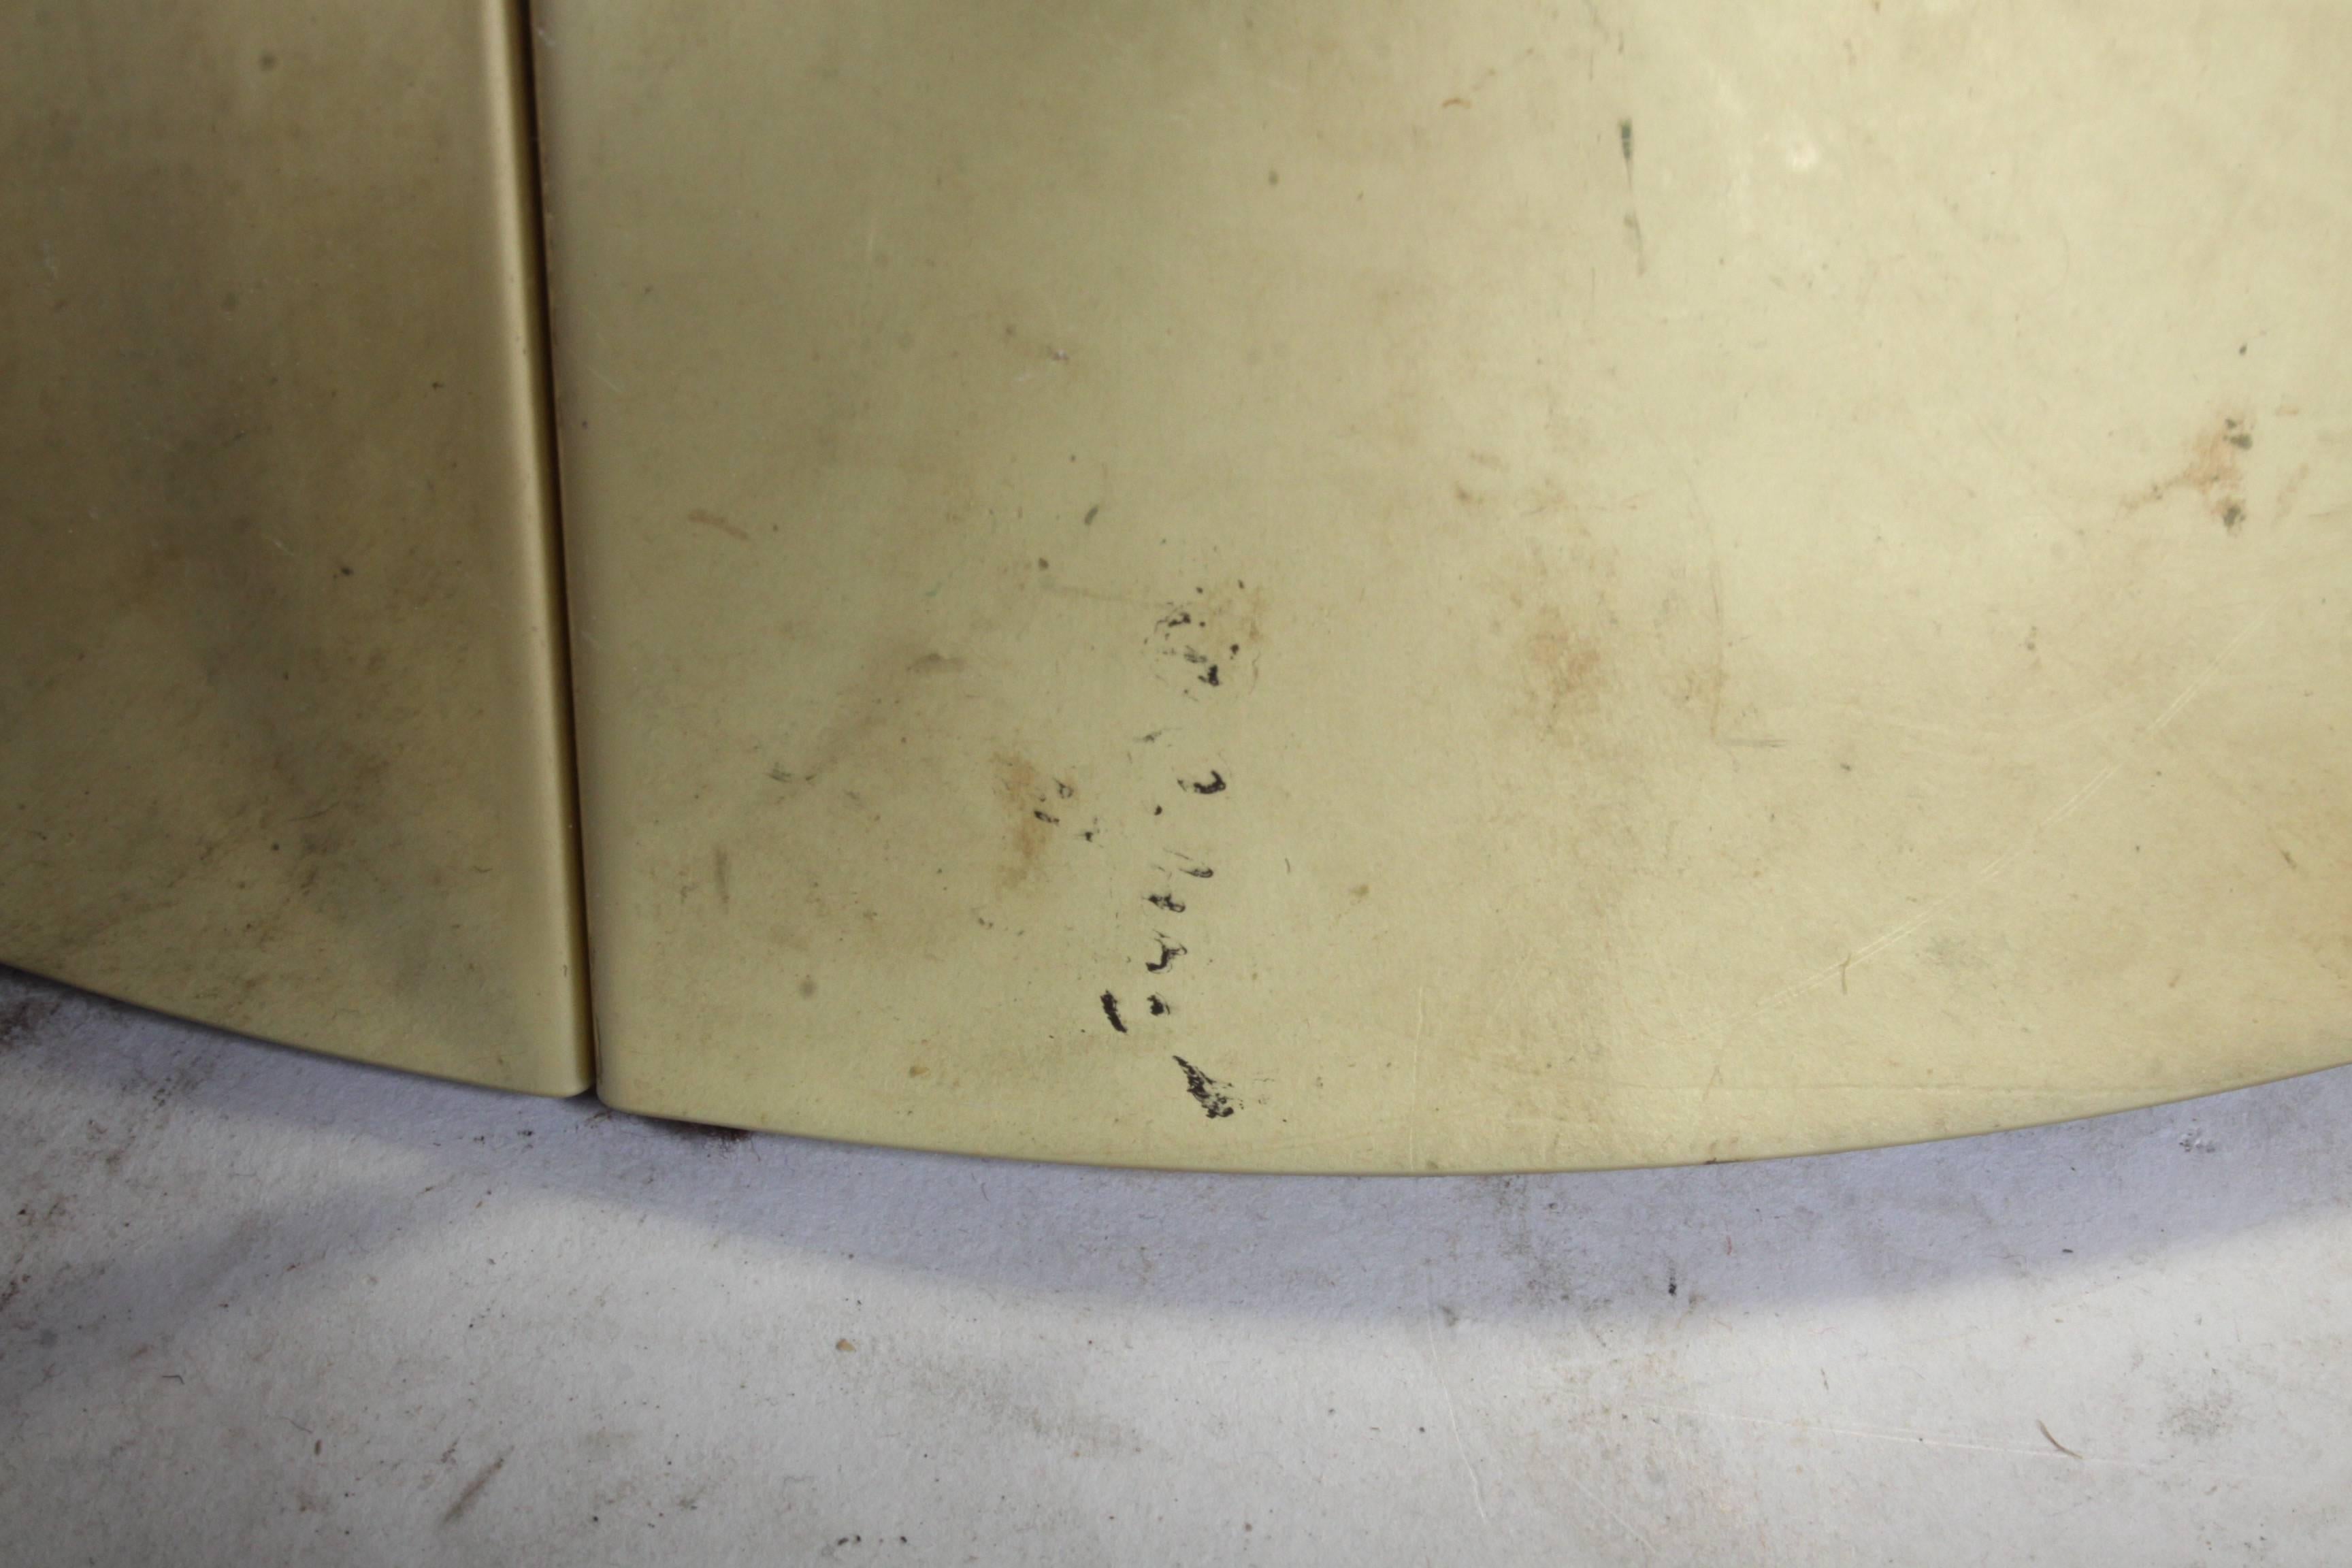 Signed C. Jere brass drum end or side table with slight patina. One minor small indentation at base. Signature is present, but faded. Note brass is reflective, picking up dirt on paper. Vertical seems.